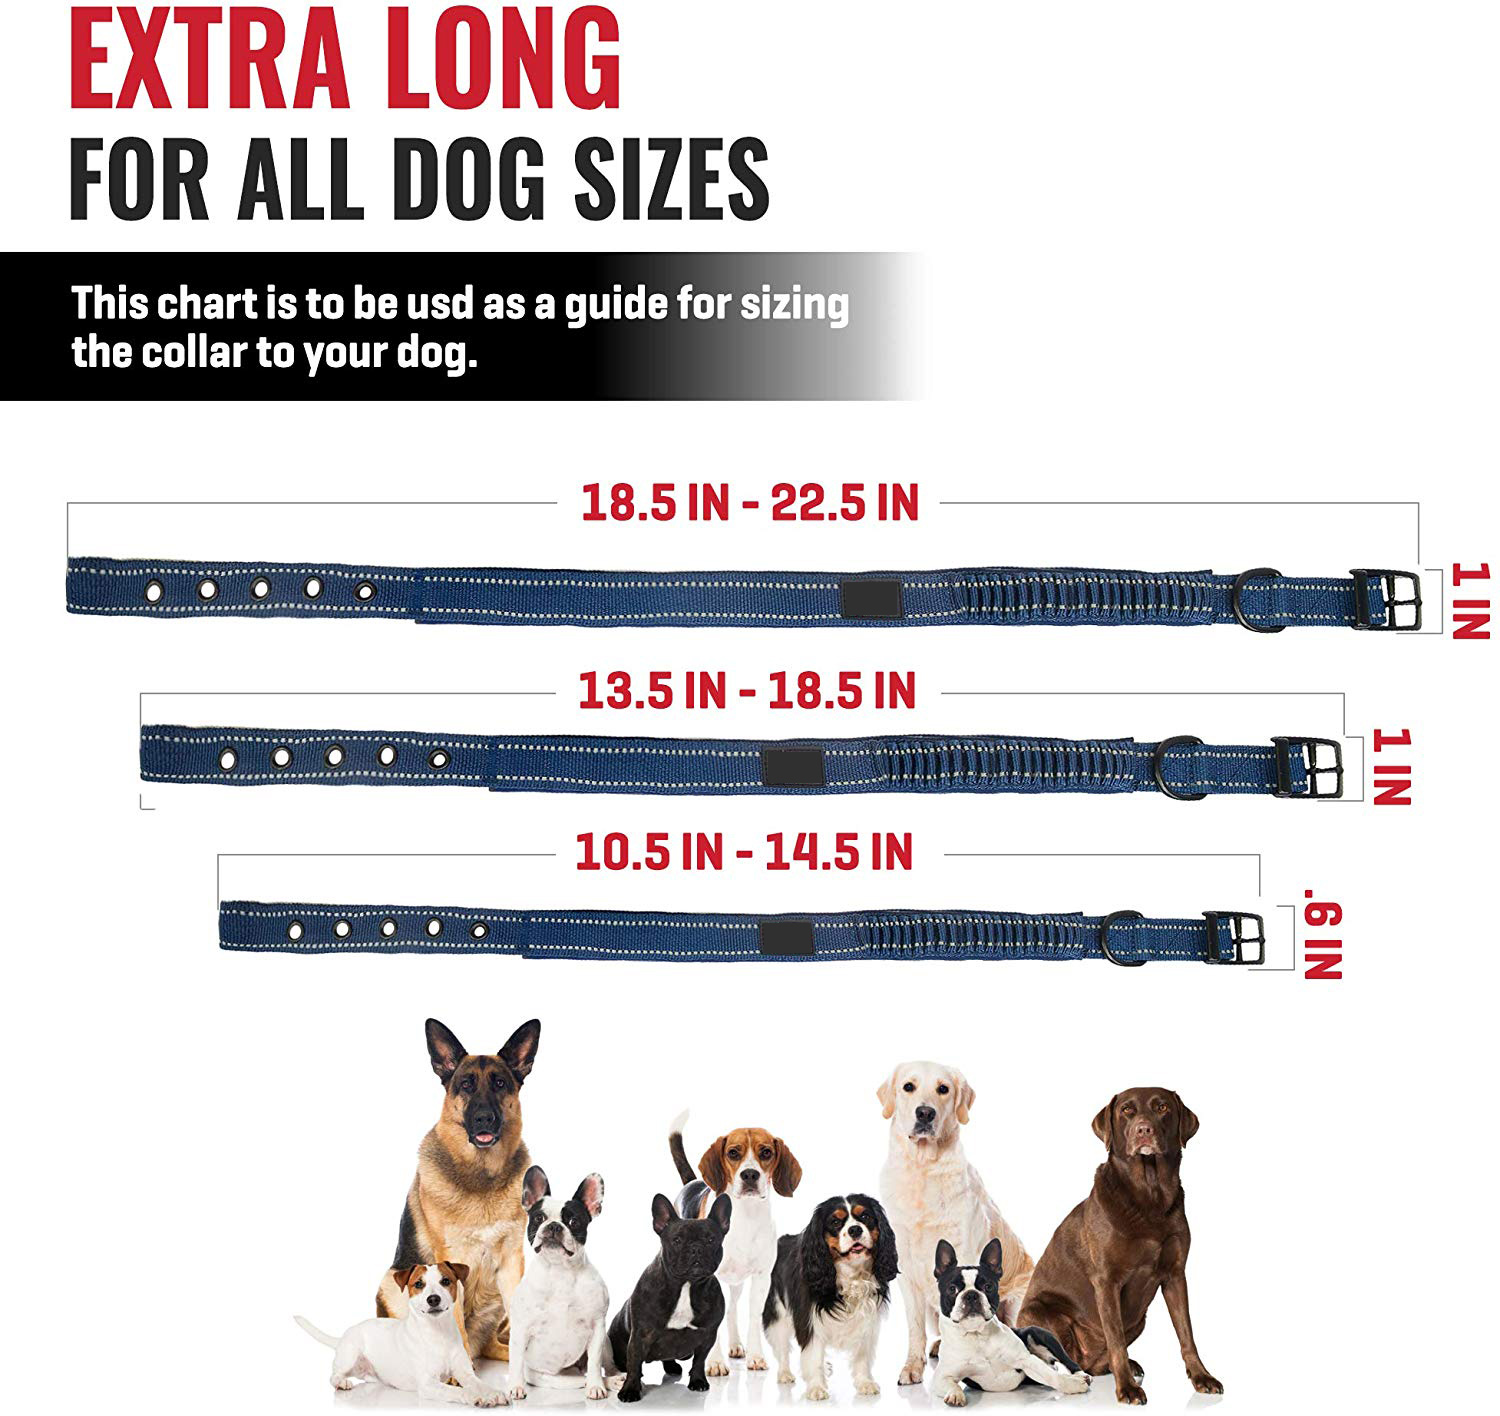 Padded Reflective Soft Nylon Dog Collar With Adjustable Stainless Steel Hardware